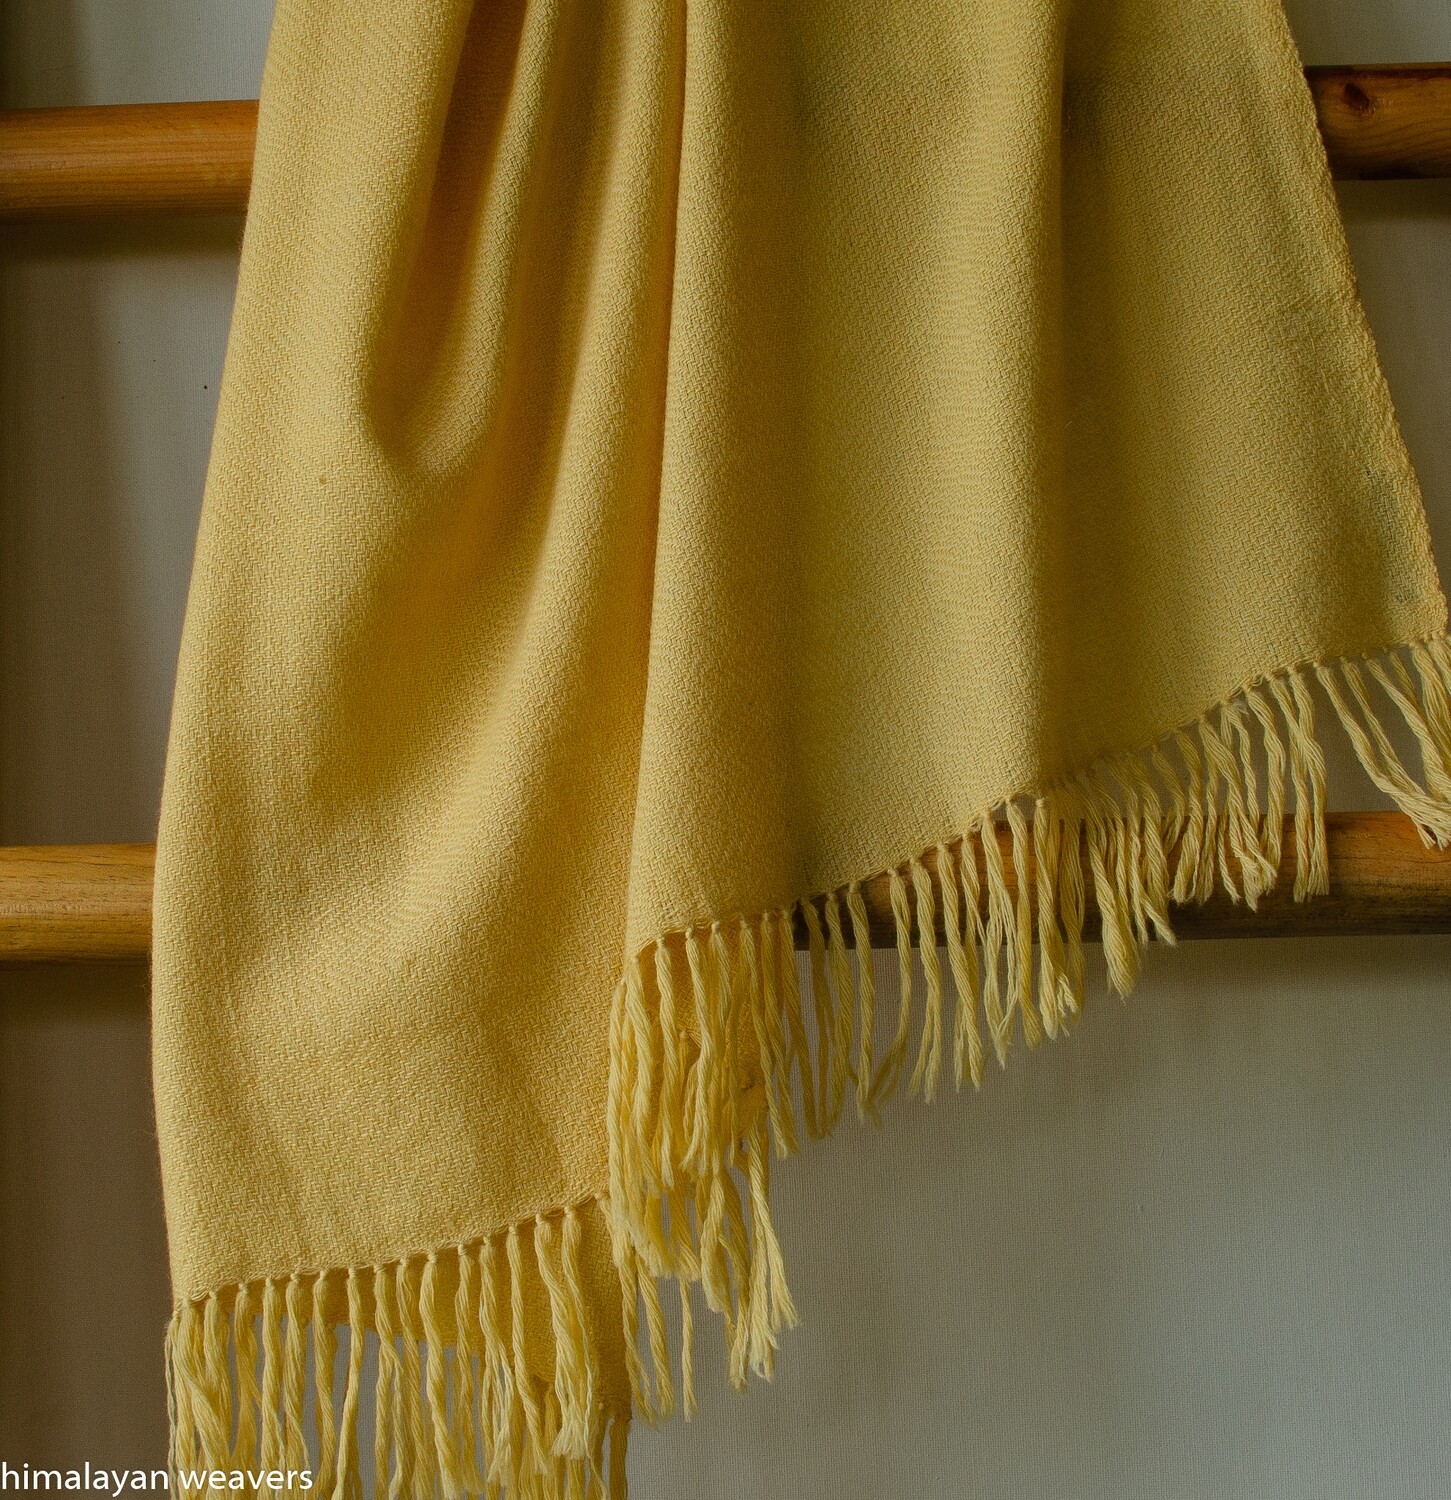 Hand-woven woollen shawl dyed with tesu flowers